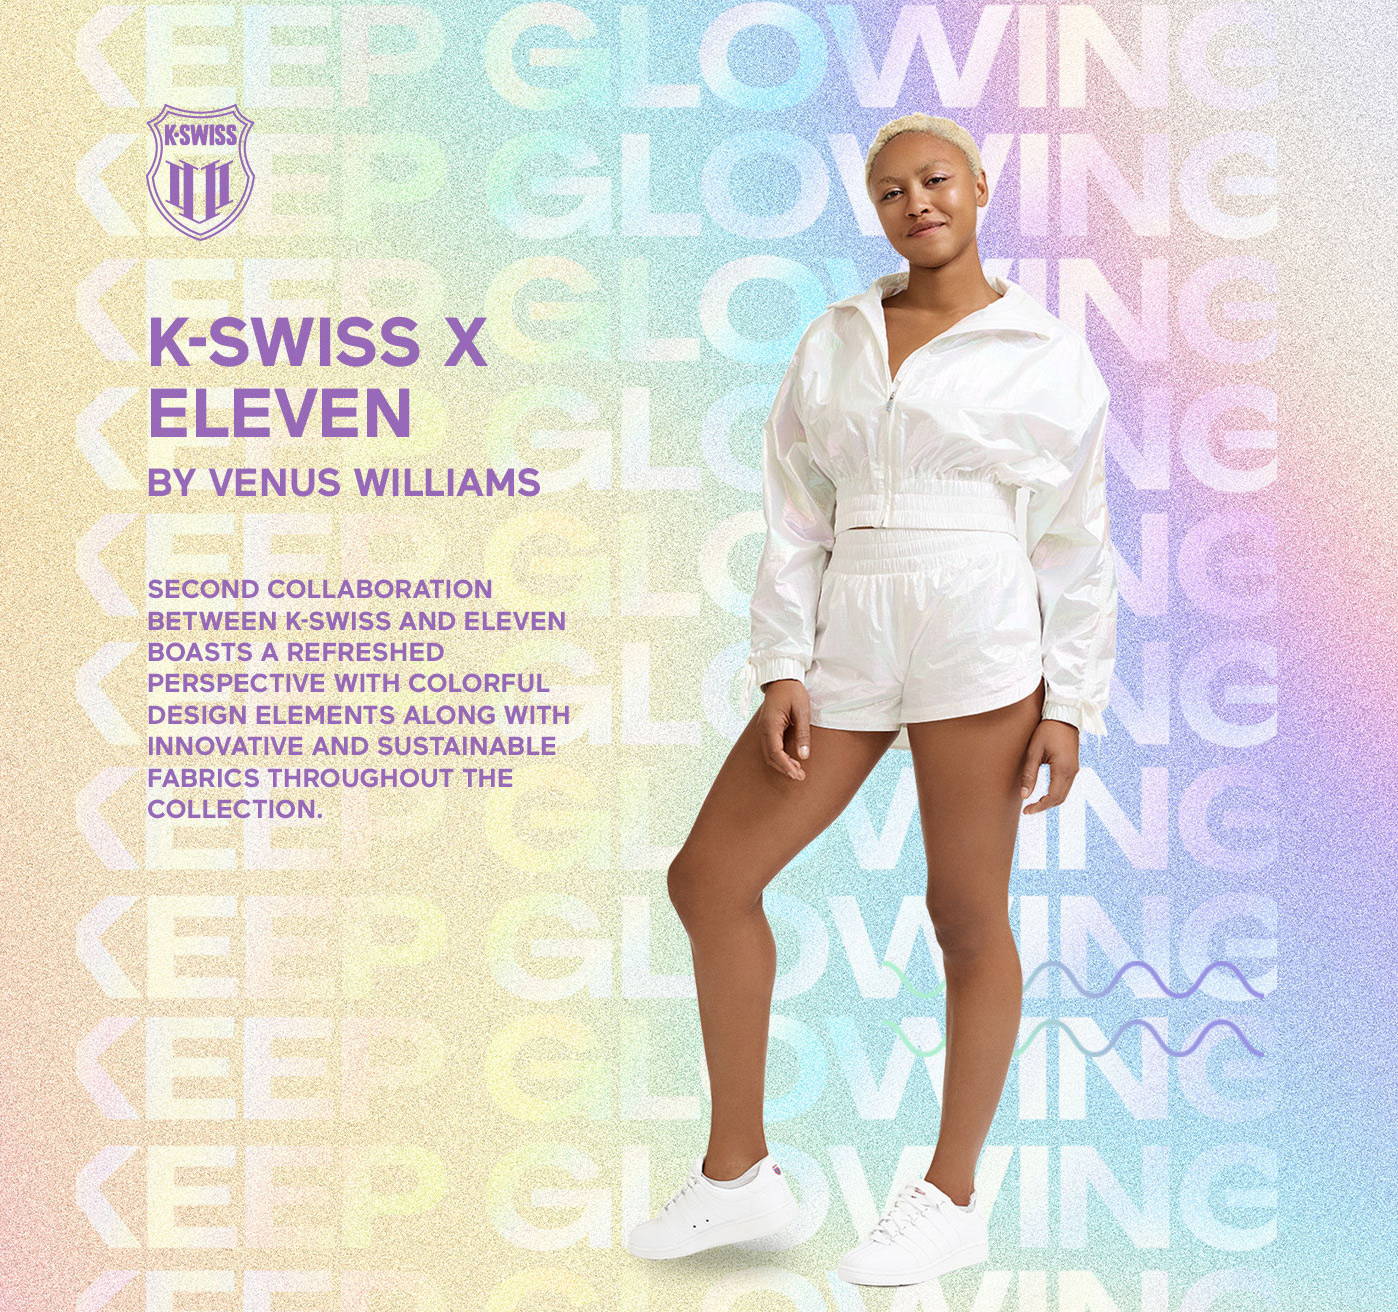 K-Swiss ElEven Logo. K-Swiss X Eleven by Venus Williams. Second collaboration between K-Swiss and Eleven boasts a fefreshed perspective with colorful design elements along with innovative and sustainable fabrics throughout the collection. Model wearing new collaborations styles. 